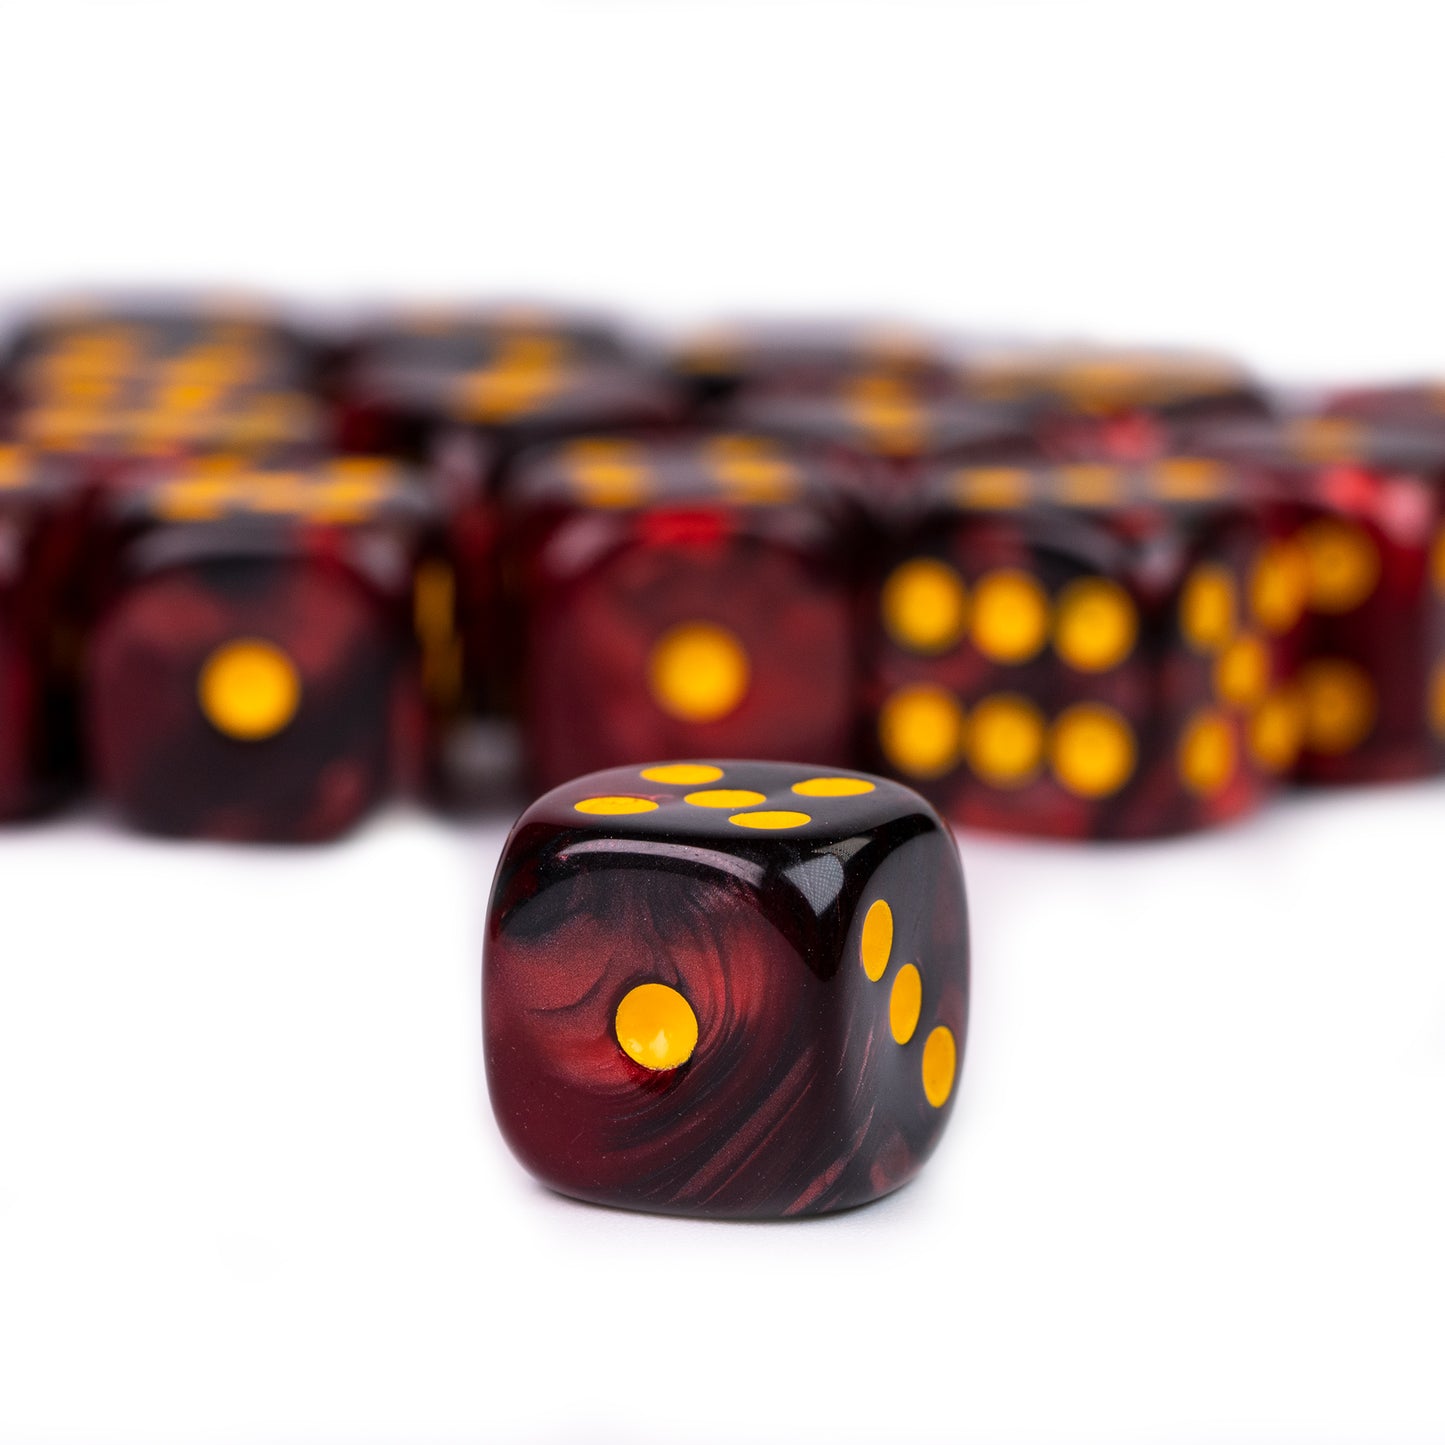 12mm D6 | Red & Black | Pack of 36